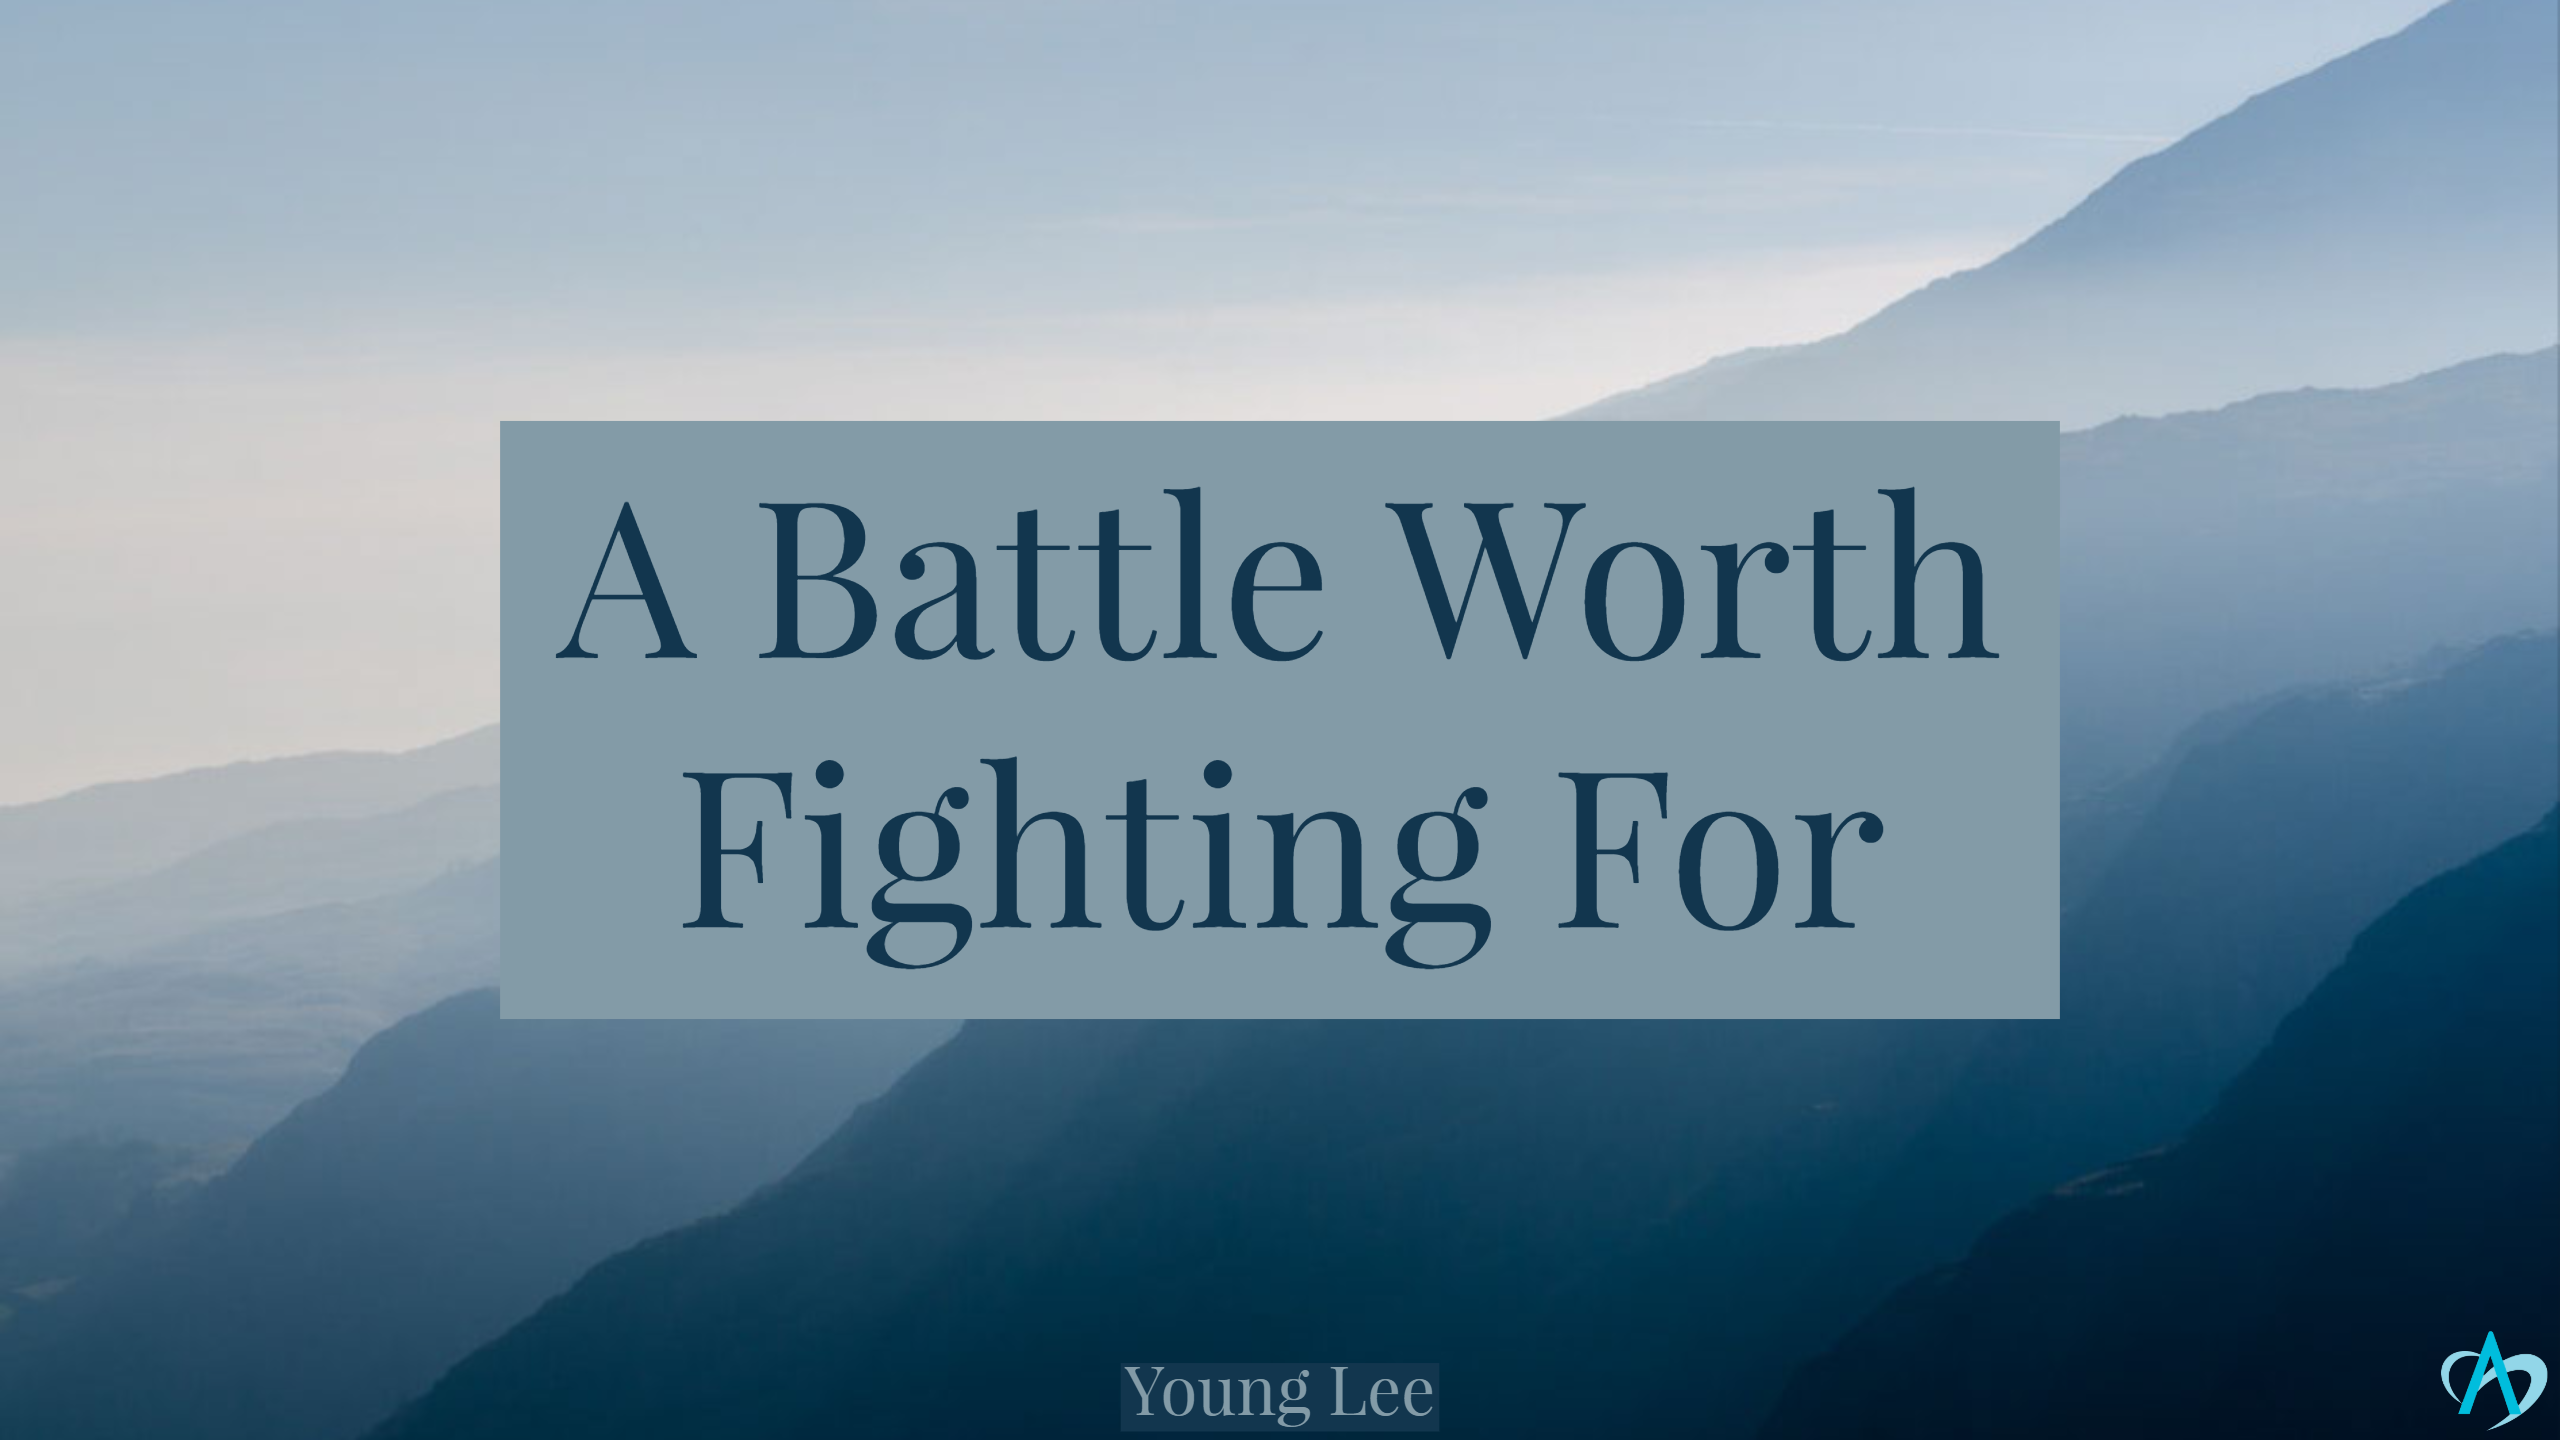 A Battle Worth Fighting For